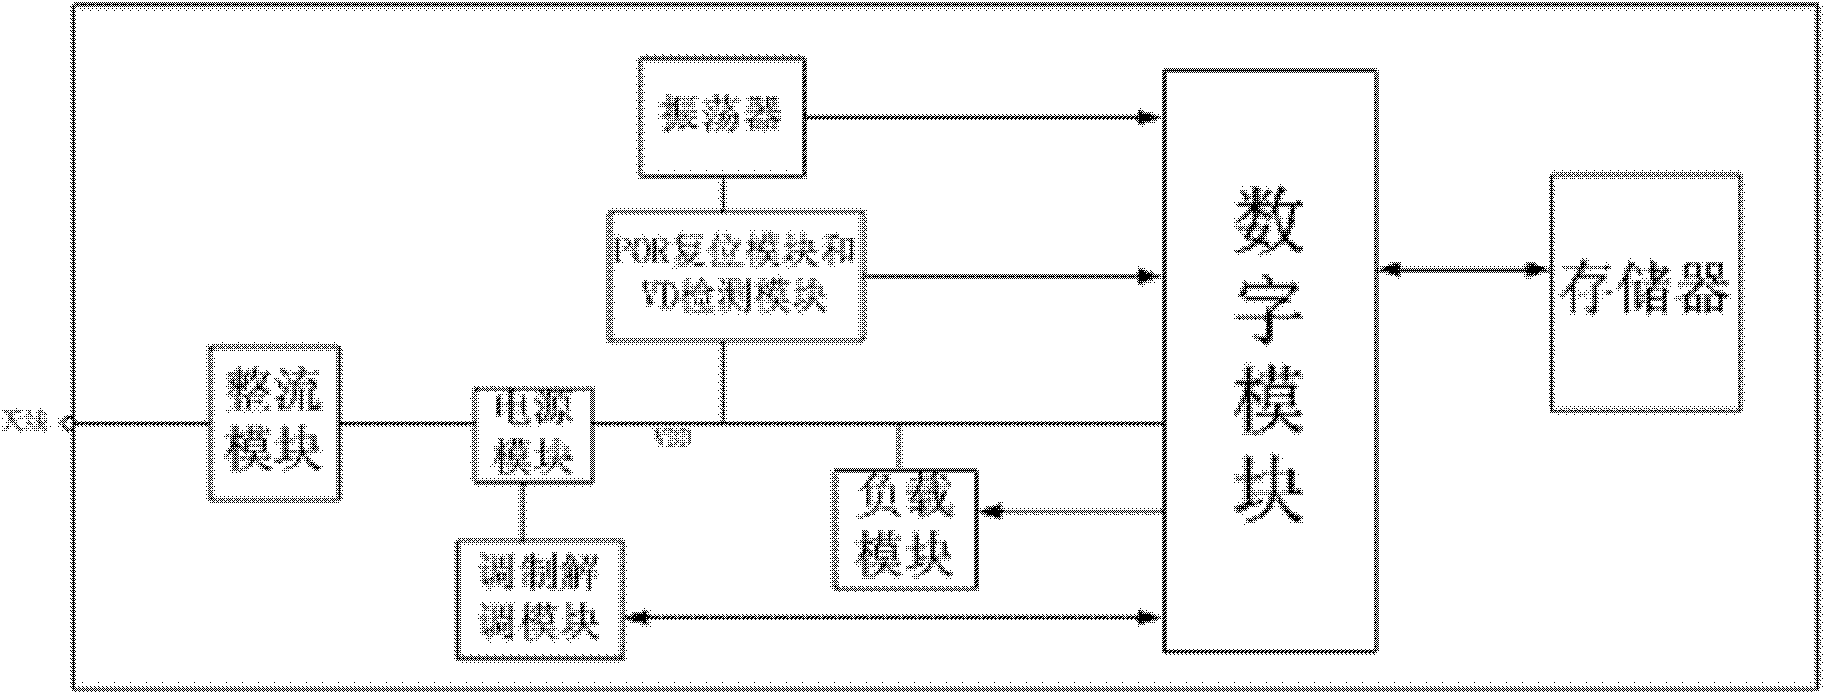 Ultrahigh frequency electronic tag and sensitivity configuration method thereof